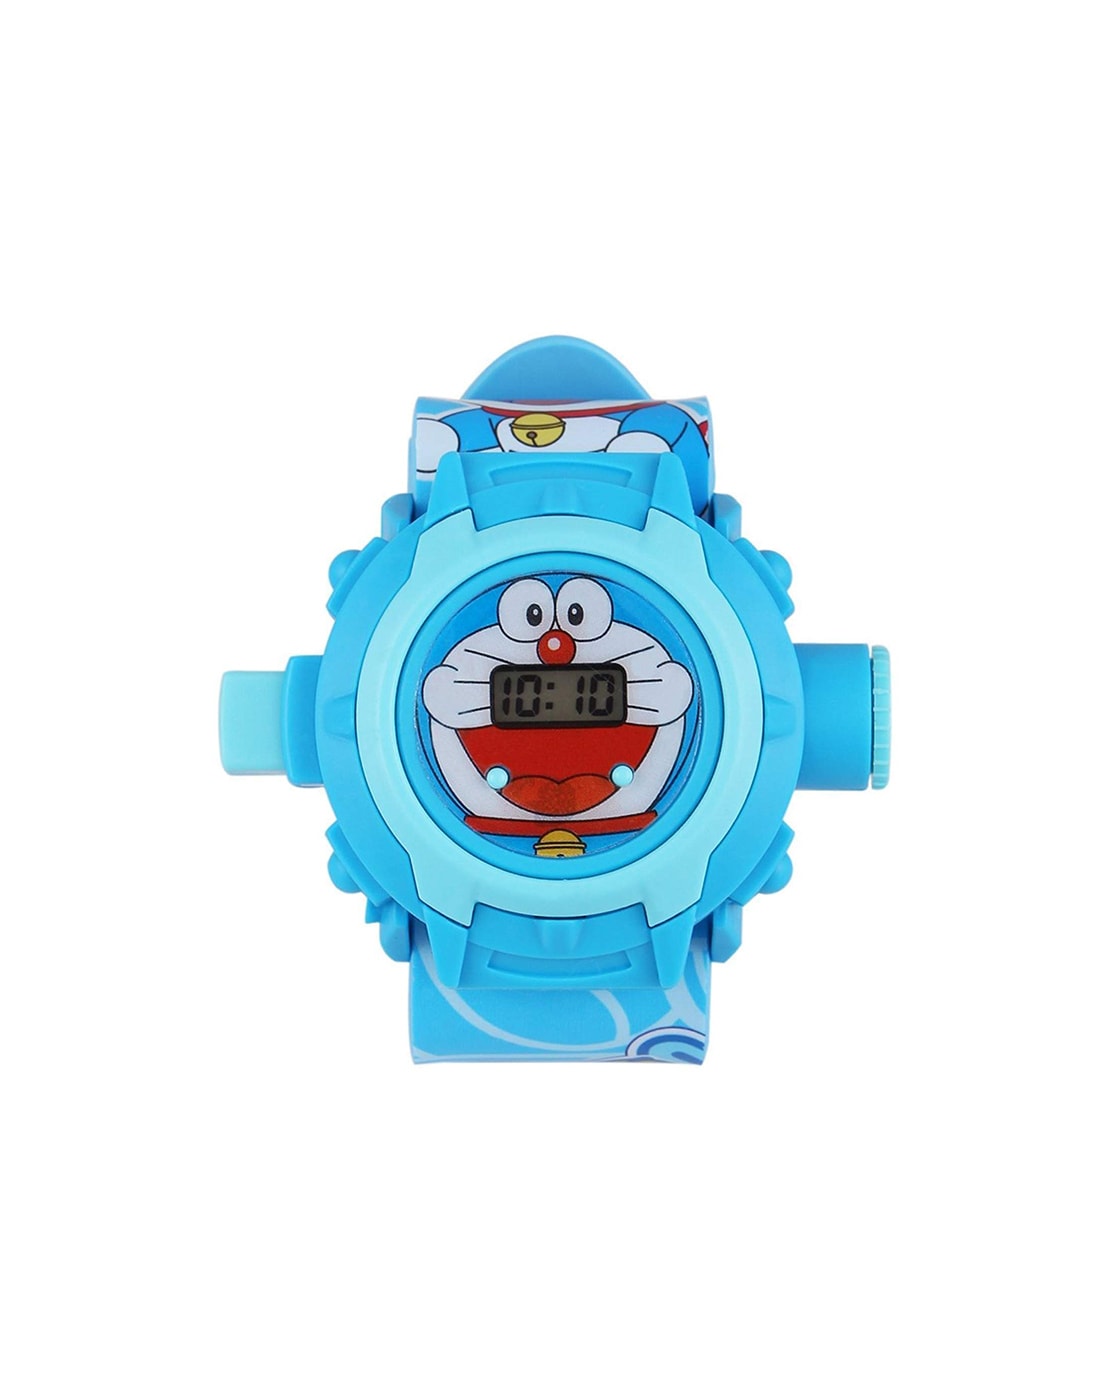 Doraemon Watch with Projector Image 【 GiftWhat 】 - YouTube